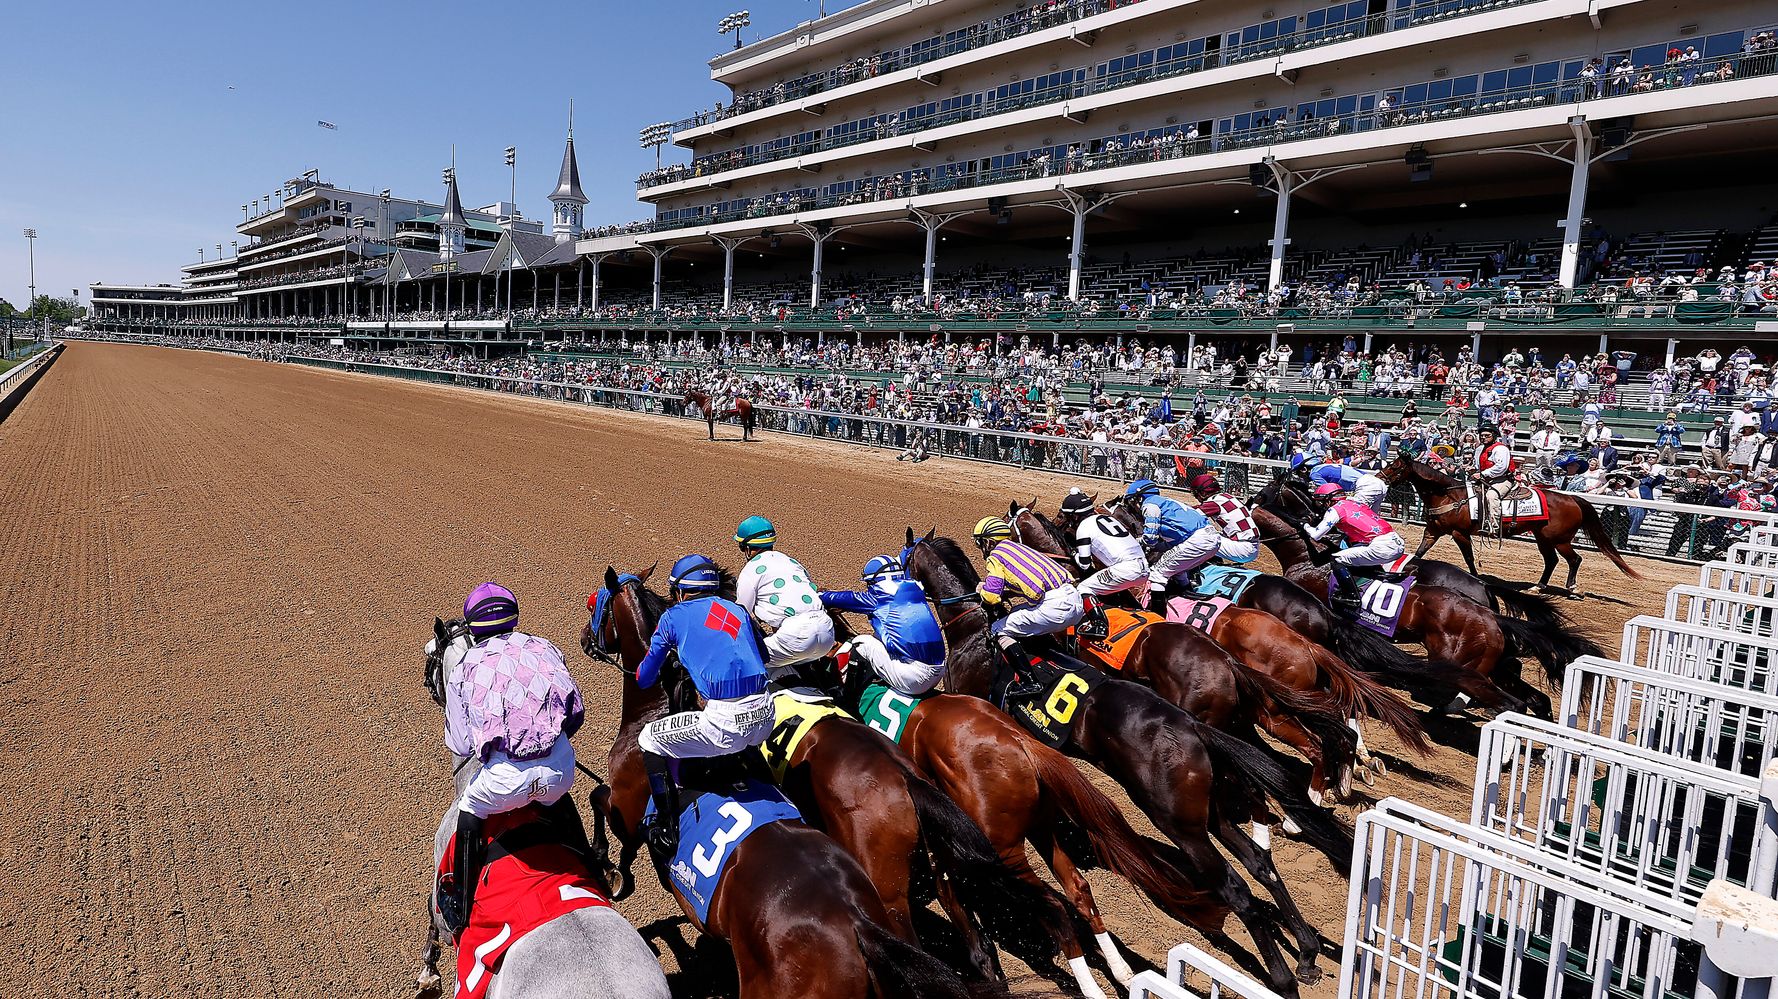 More Than 51,000 People, Many Without Masks, Attend Kentucky Derby